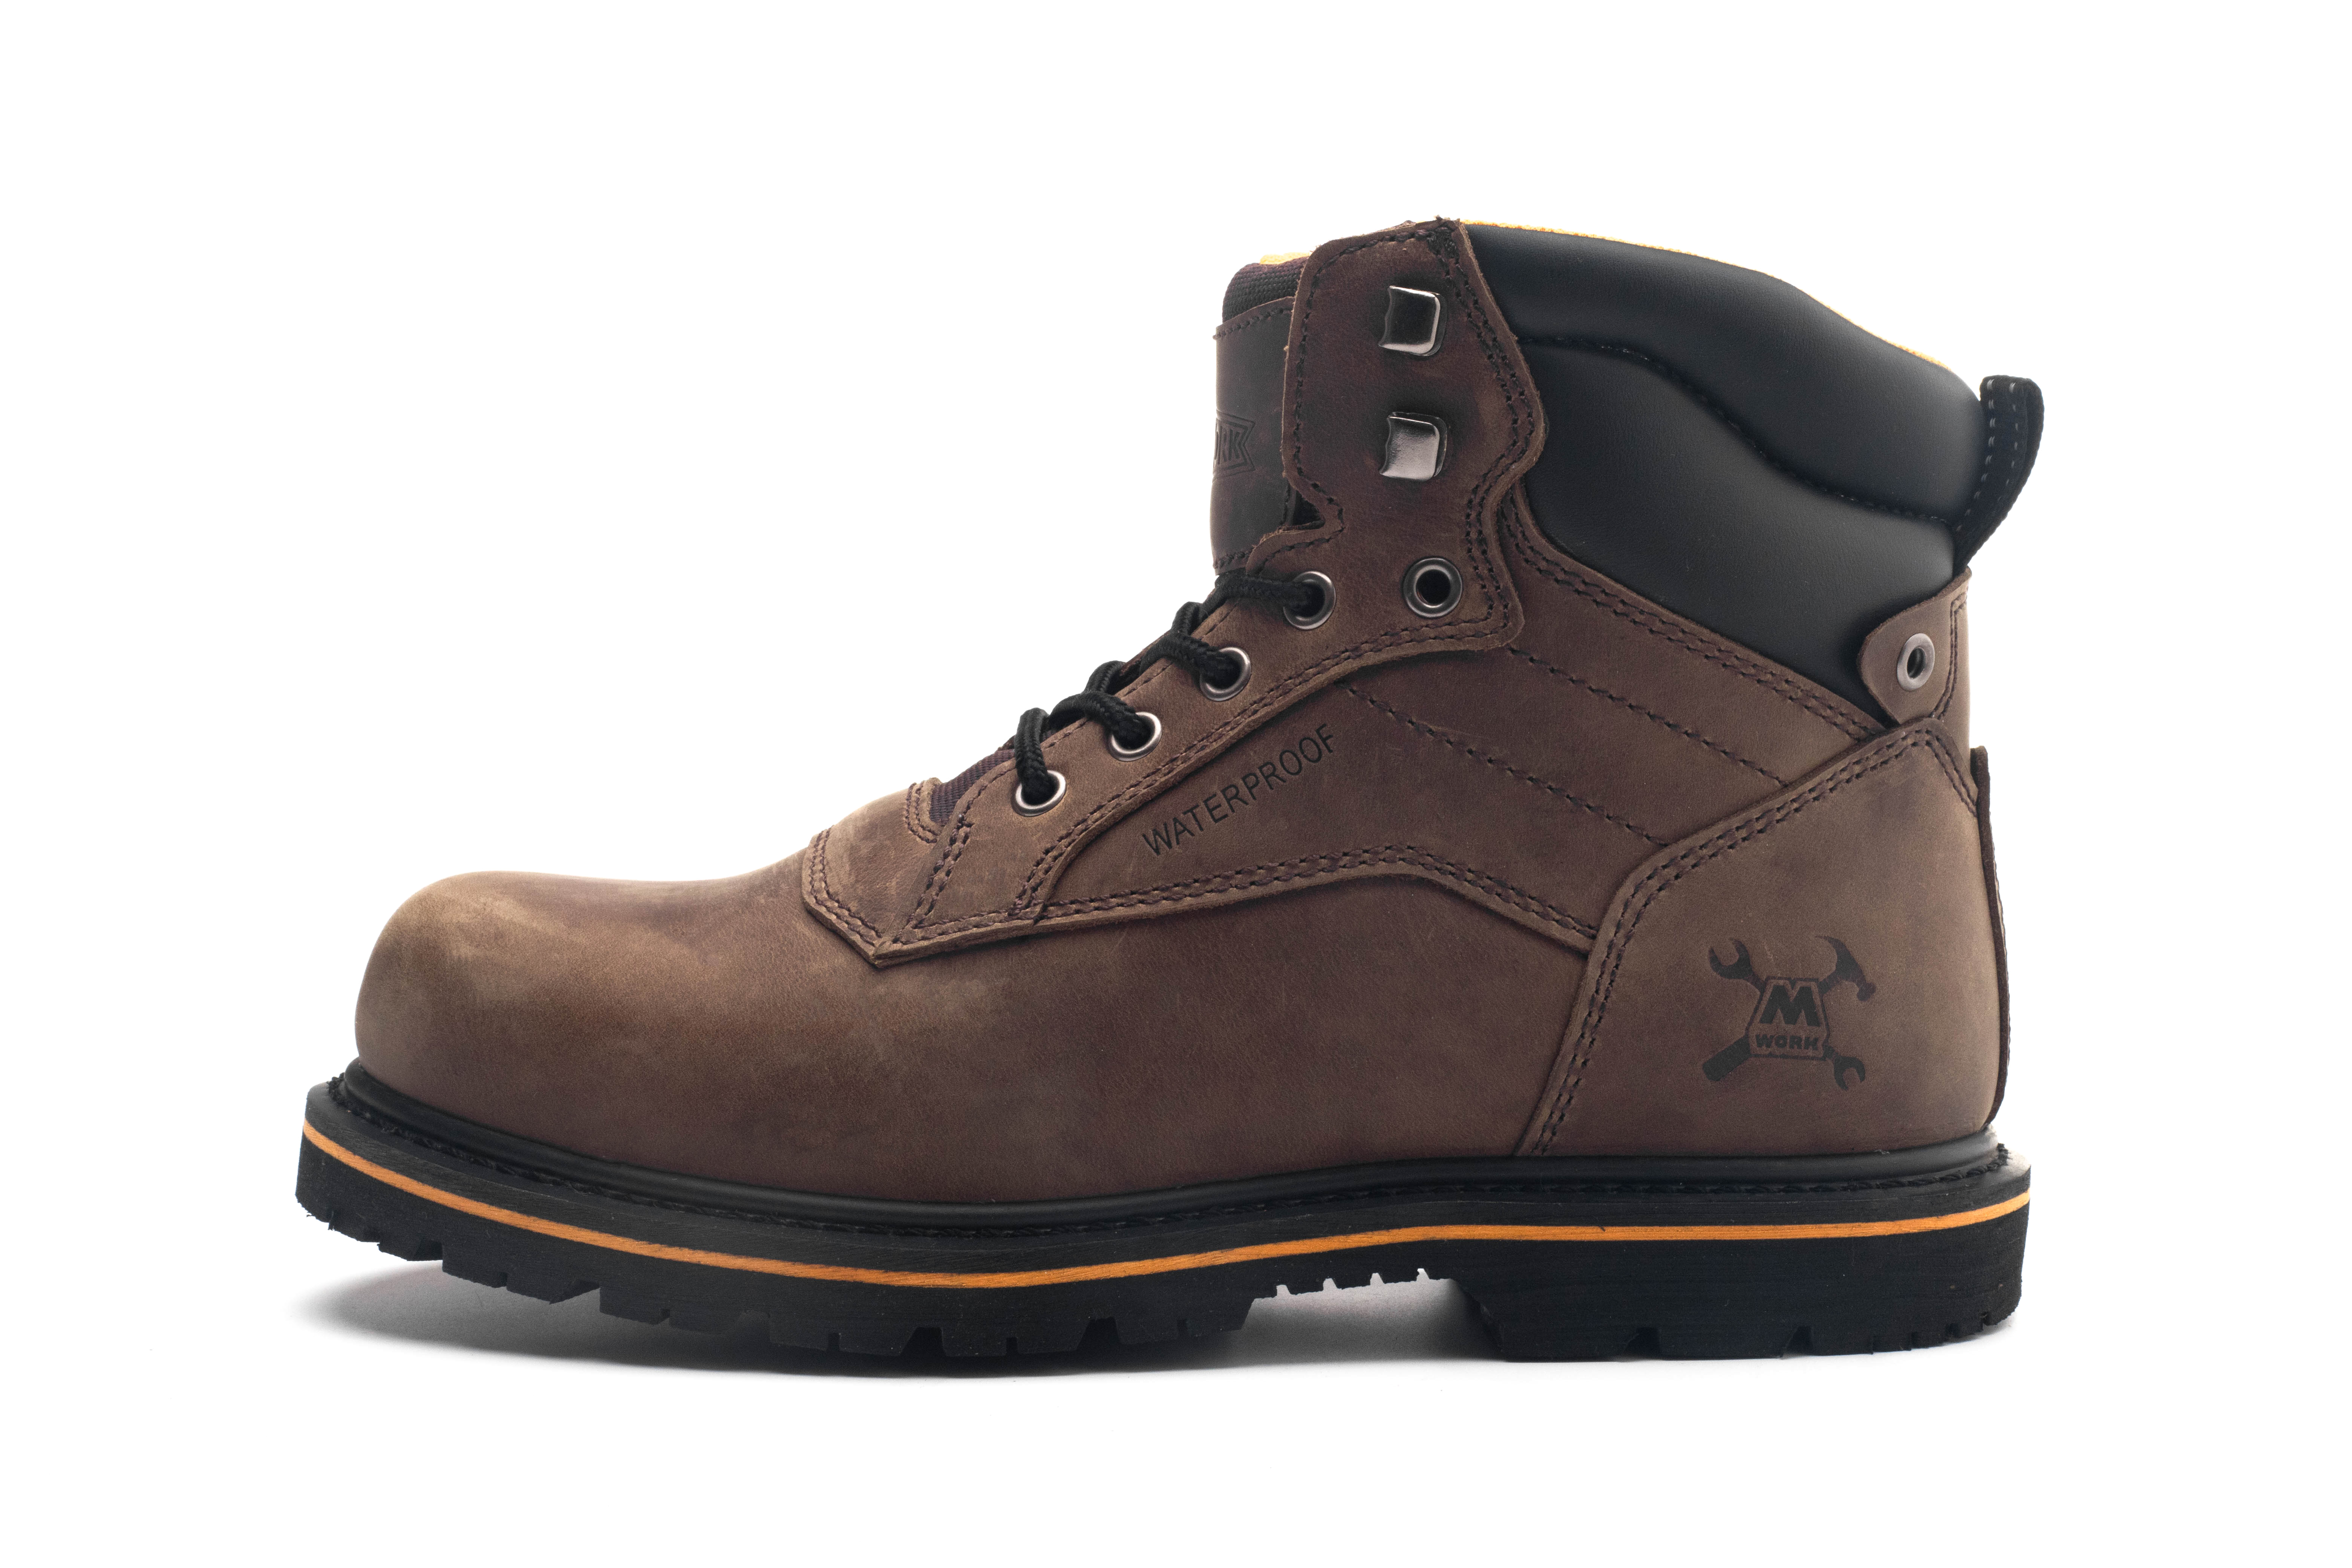 Top Work Boots for Men - A Review of Irish Setter Boots